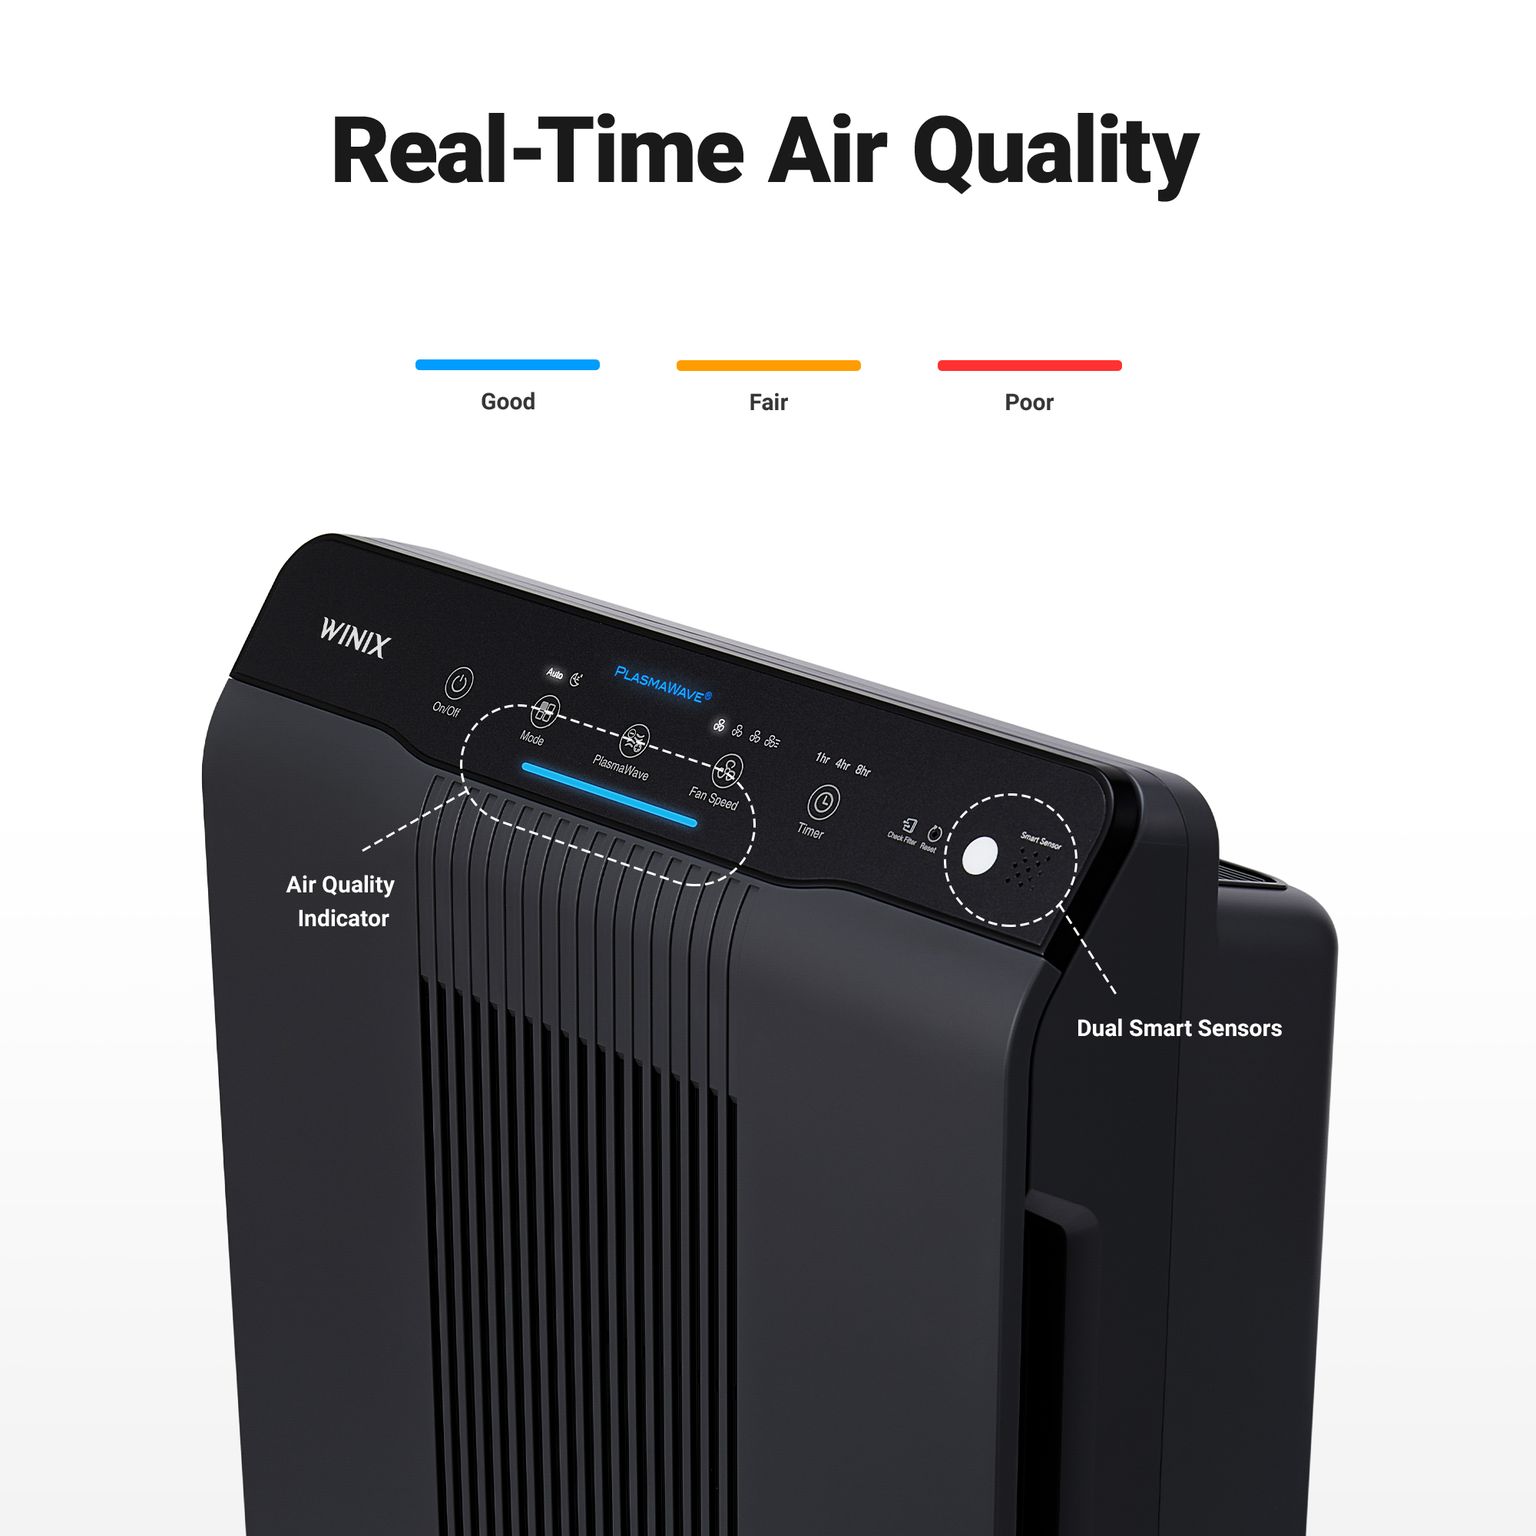 Winix 5500-2 Air Purifier with True HEPA for Particles, PlasmaWave and Odor Reducing Washable AOC Carbon Filter. AHAM Verified for 360 sq ft, Max Room Capacity of 1728 sq ft - image 2 of 7